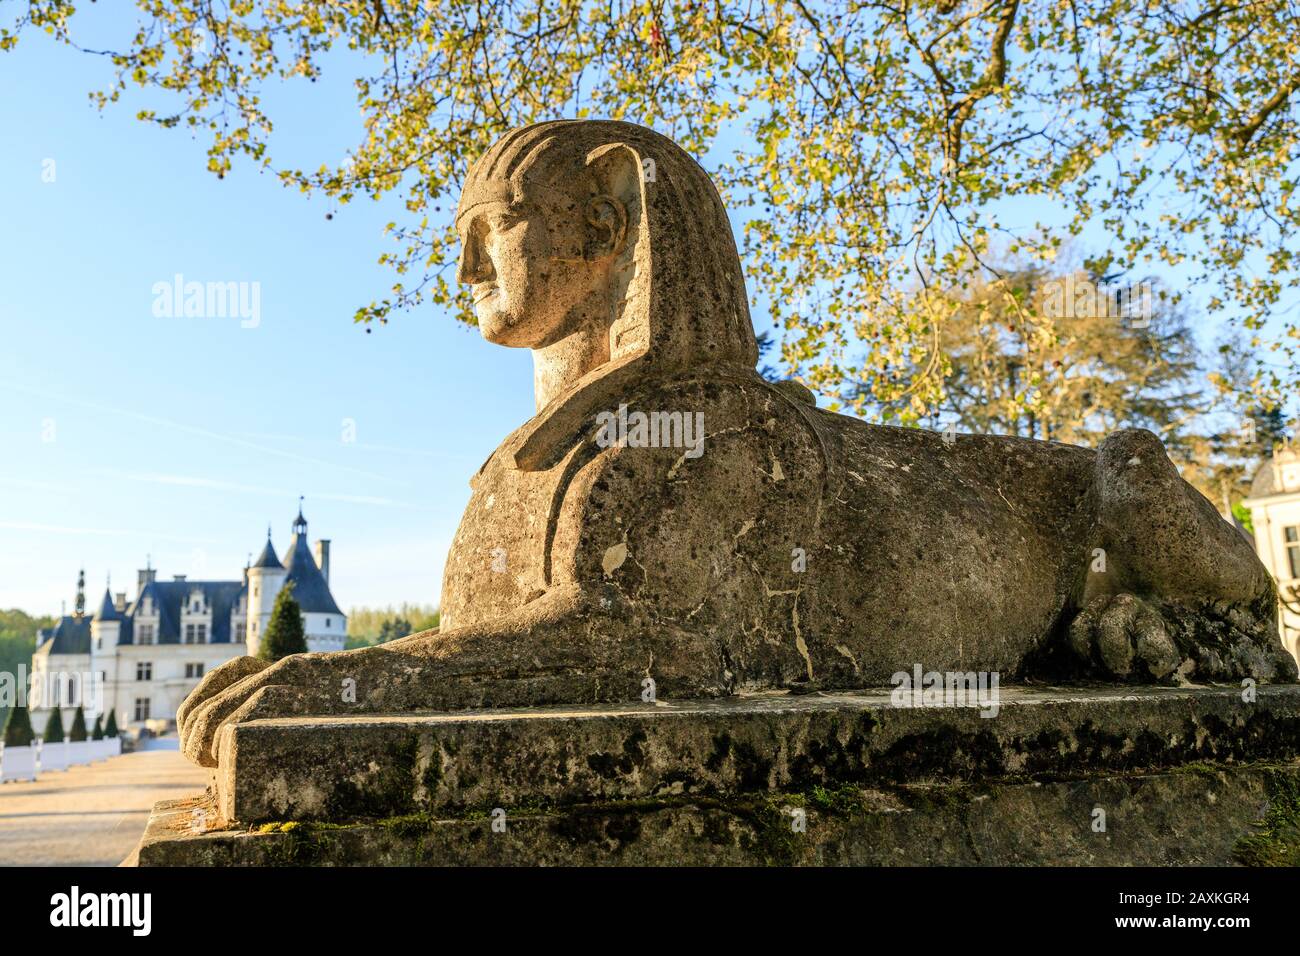 France, Indre et Loire, Loire Valley listed as World Heritage by UNESCO, Chenonceaux, Chateau de Chenonceau Park and Gardens, sphinx sculpture at the Stock Photo